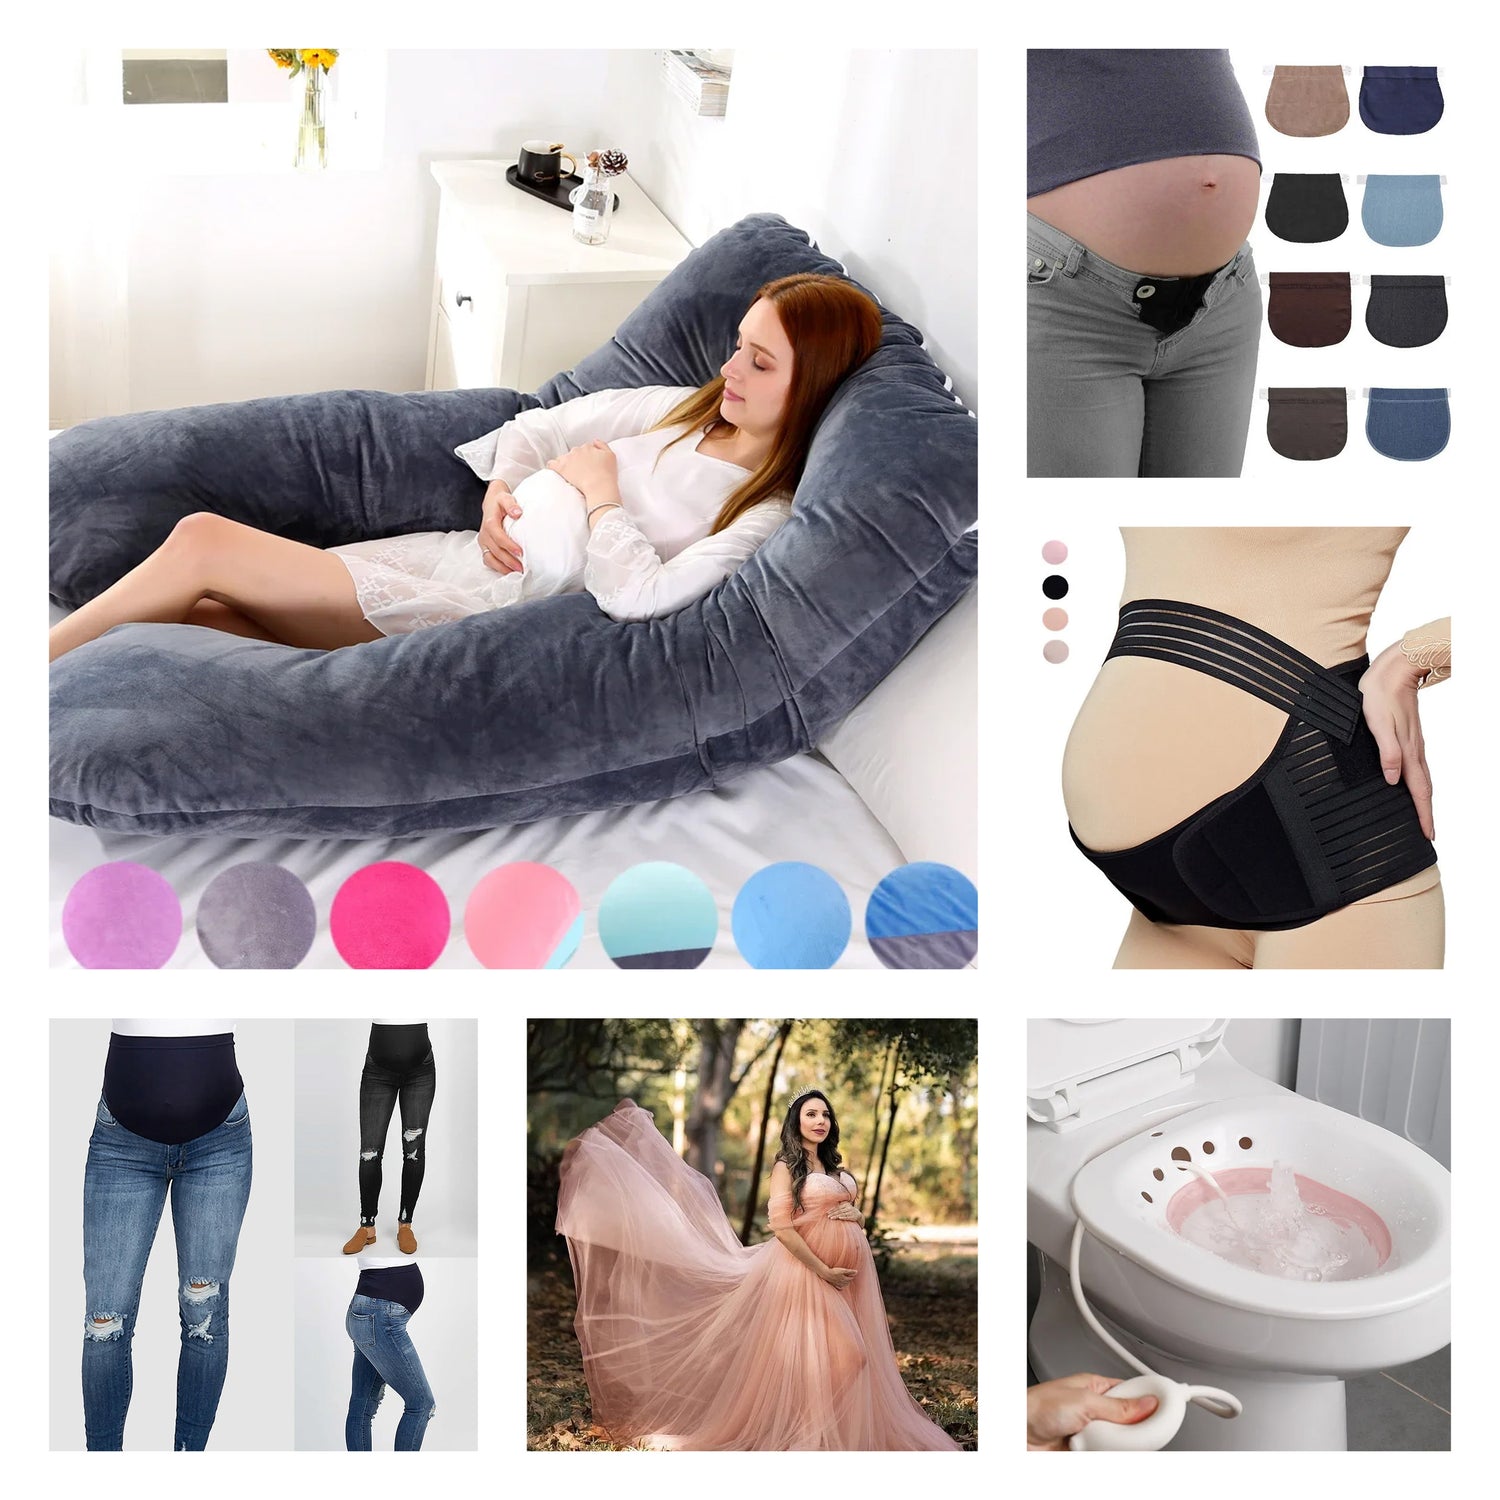 Maternity & Postpartum Apparel and Accessories: Clothes, Support Bands, Pillows, ETC